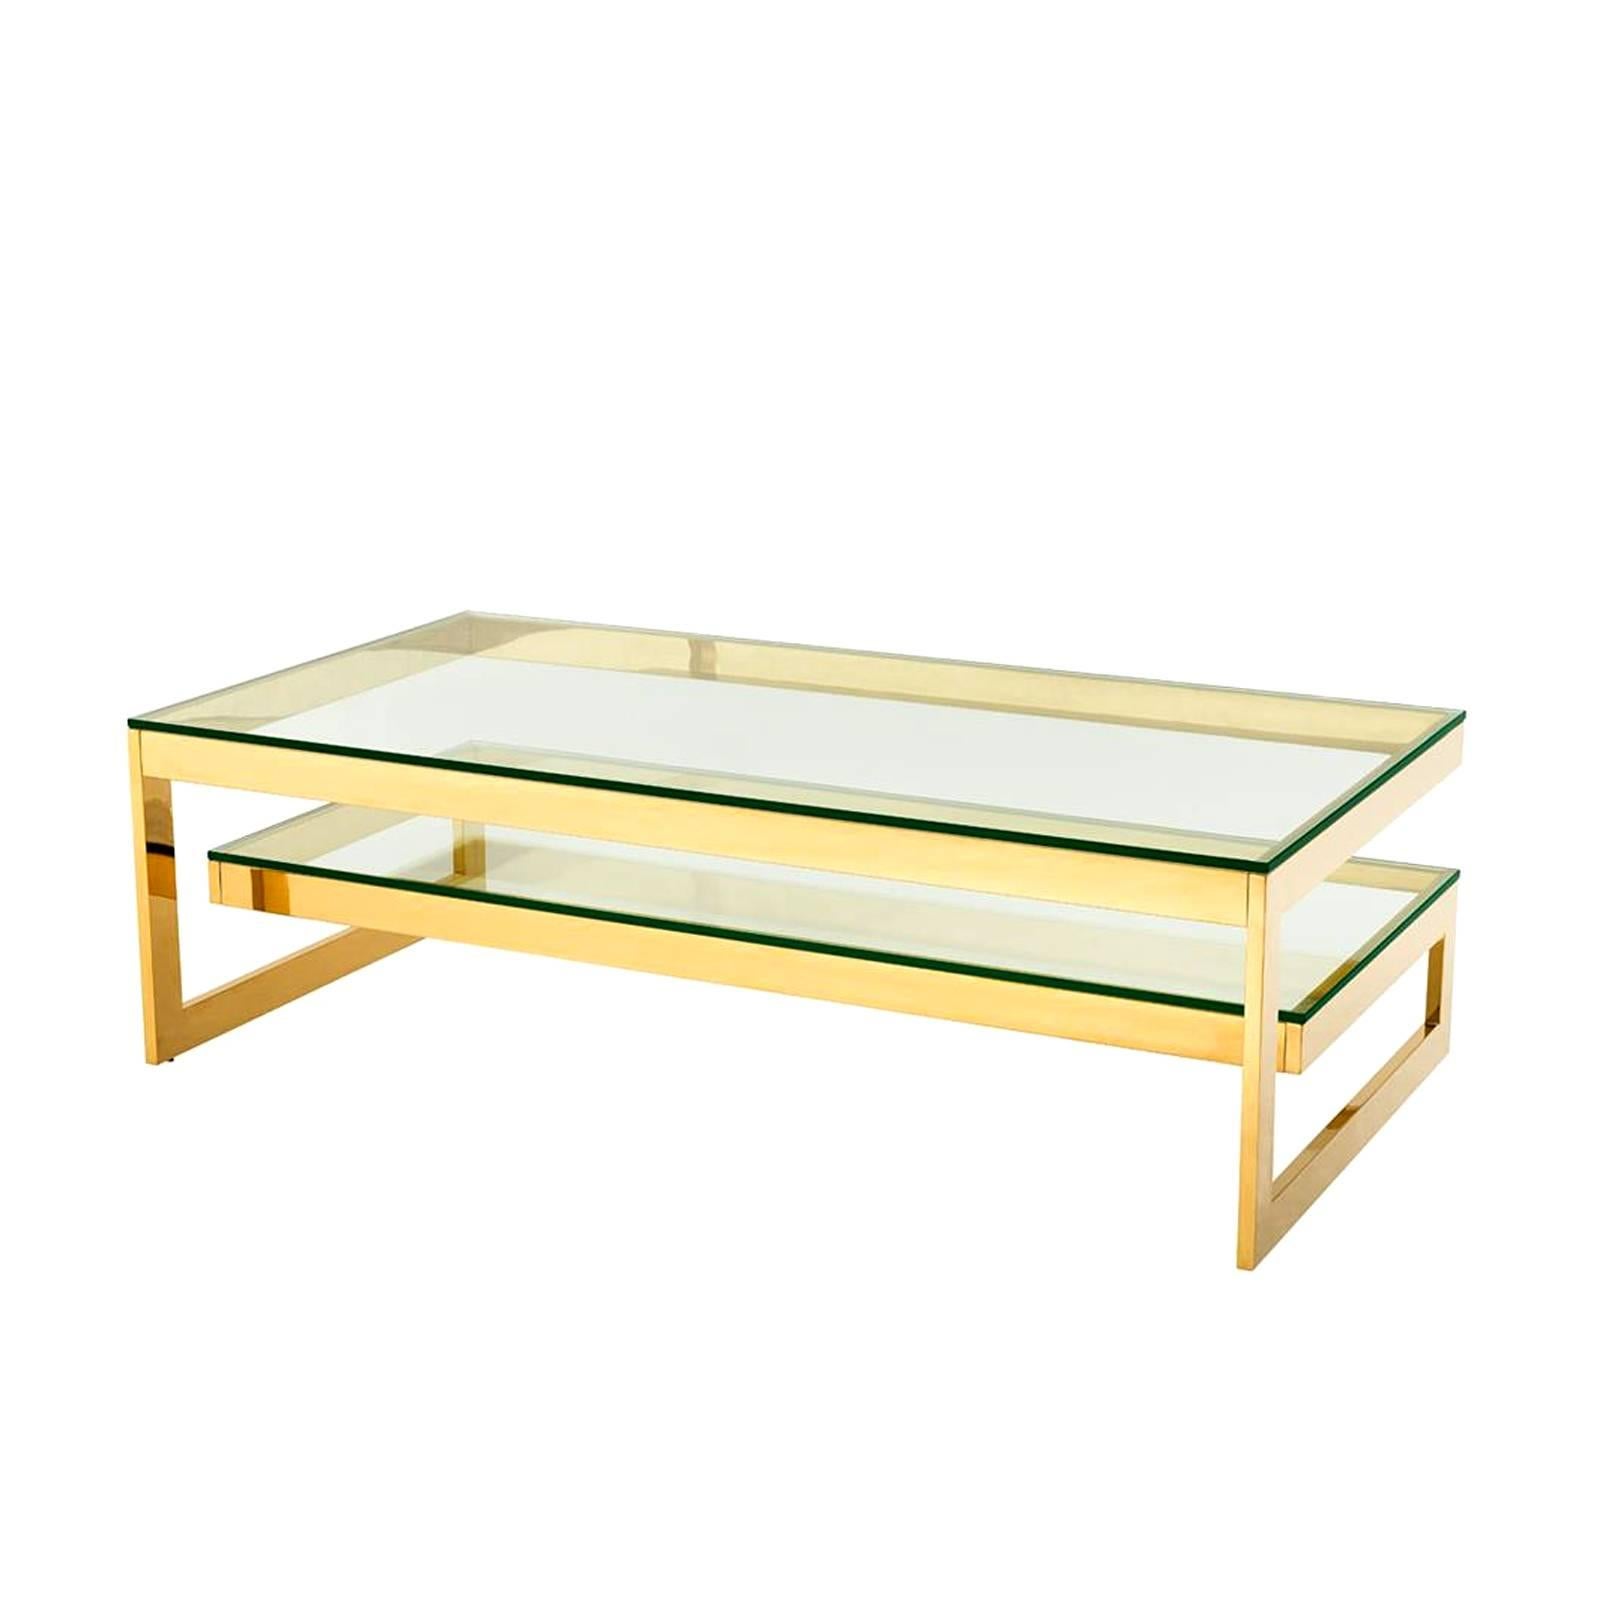 Coffee table double top with structure in gold
finish with 2 clear glass top.
Available with structure in bronze finish and 2
clear glass top.
Also available in console and side table double top.
